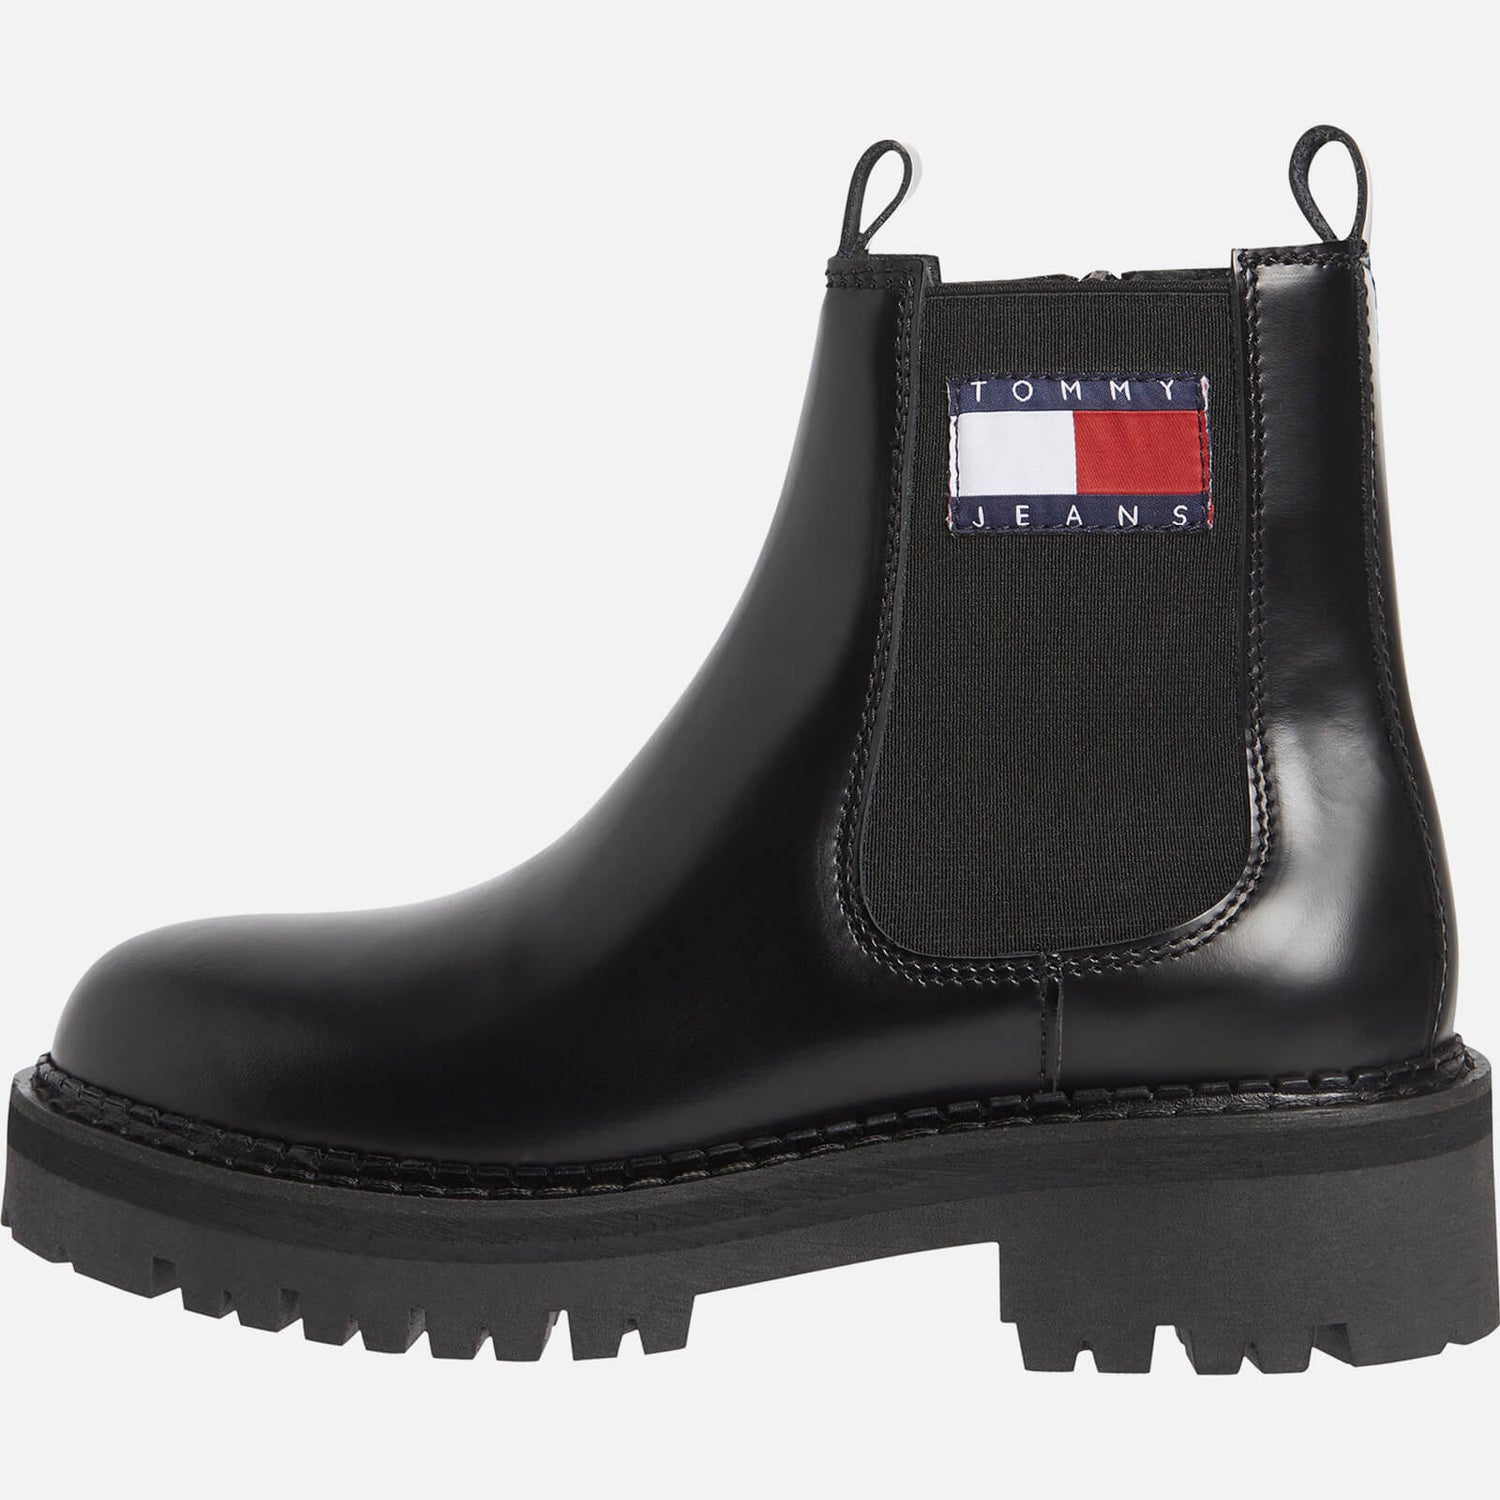 Tommy Jeans Women's Urban Leather Chelsea Boots - Black